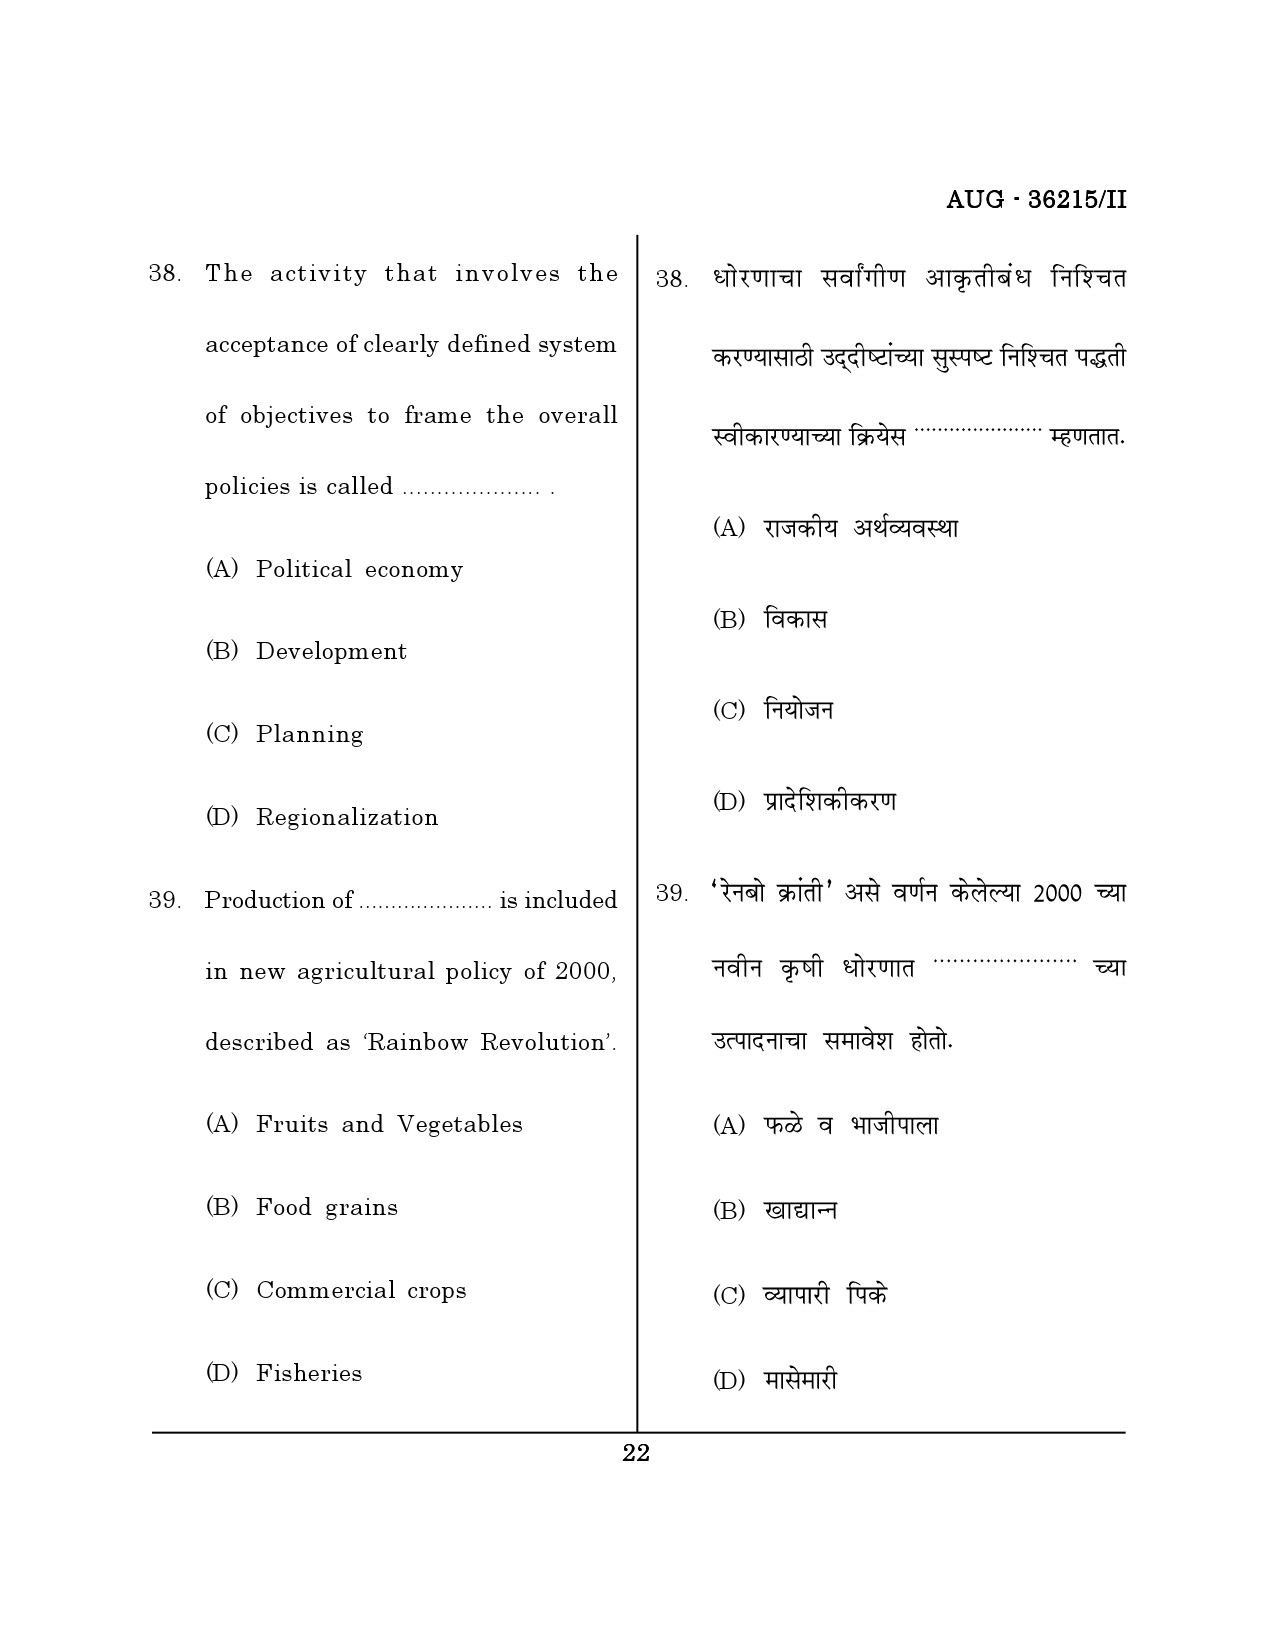 Maharashtra SET Geography Question Paper II August 2015 21